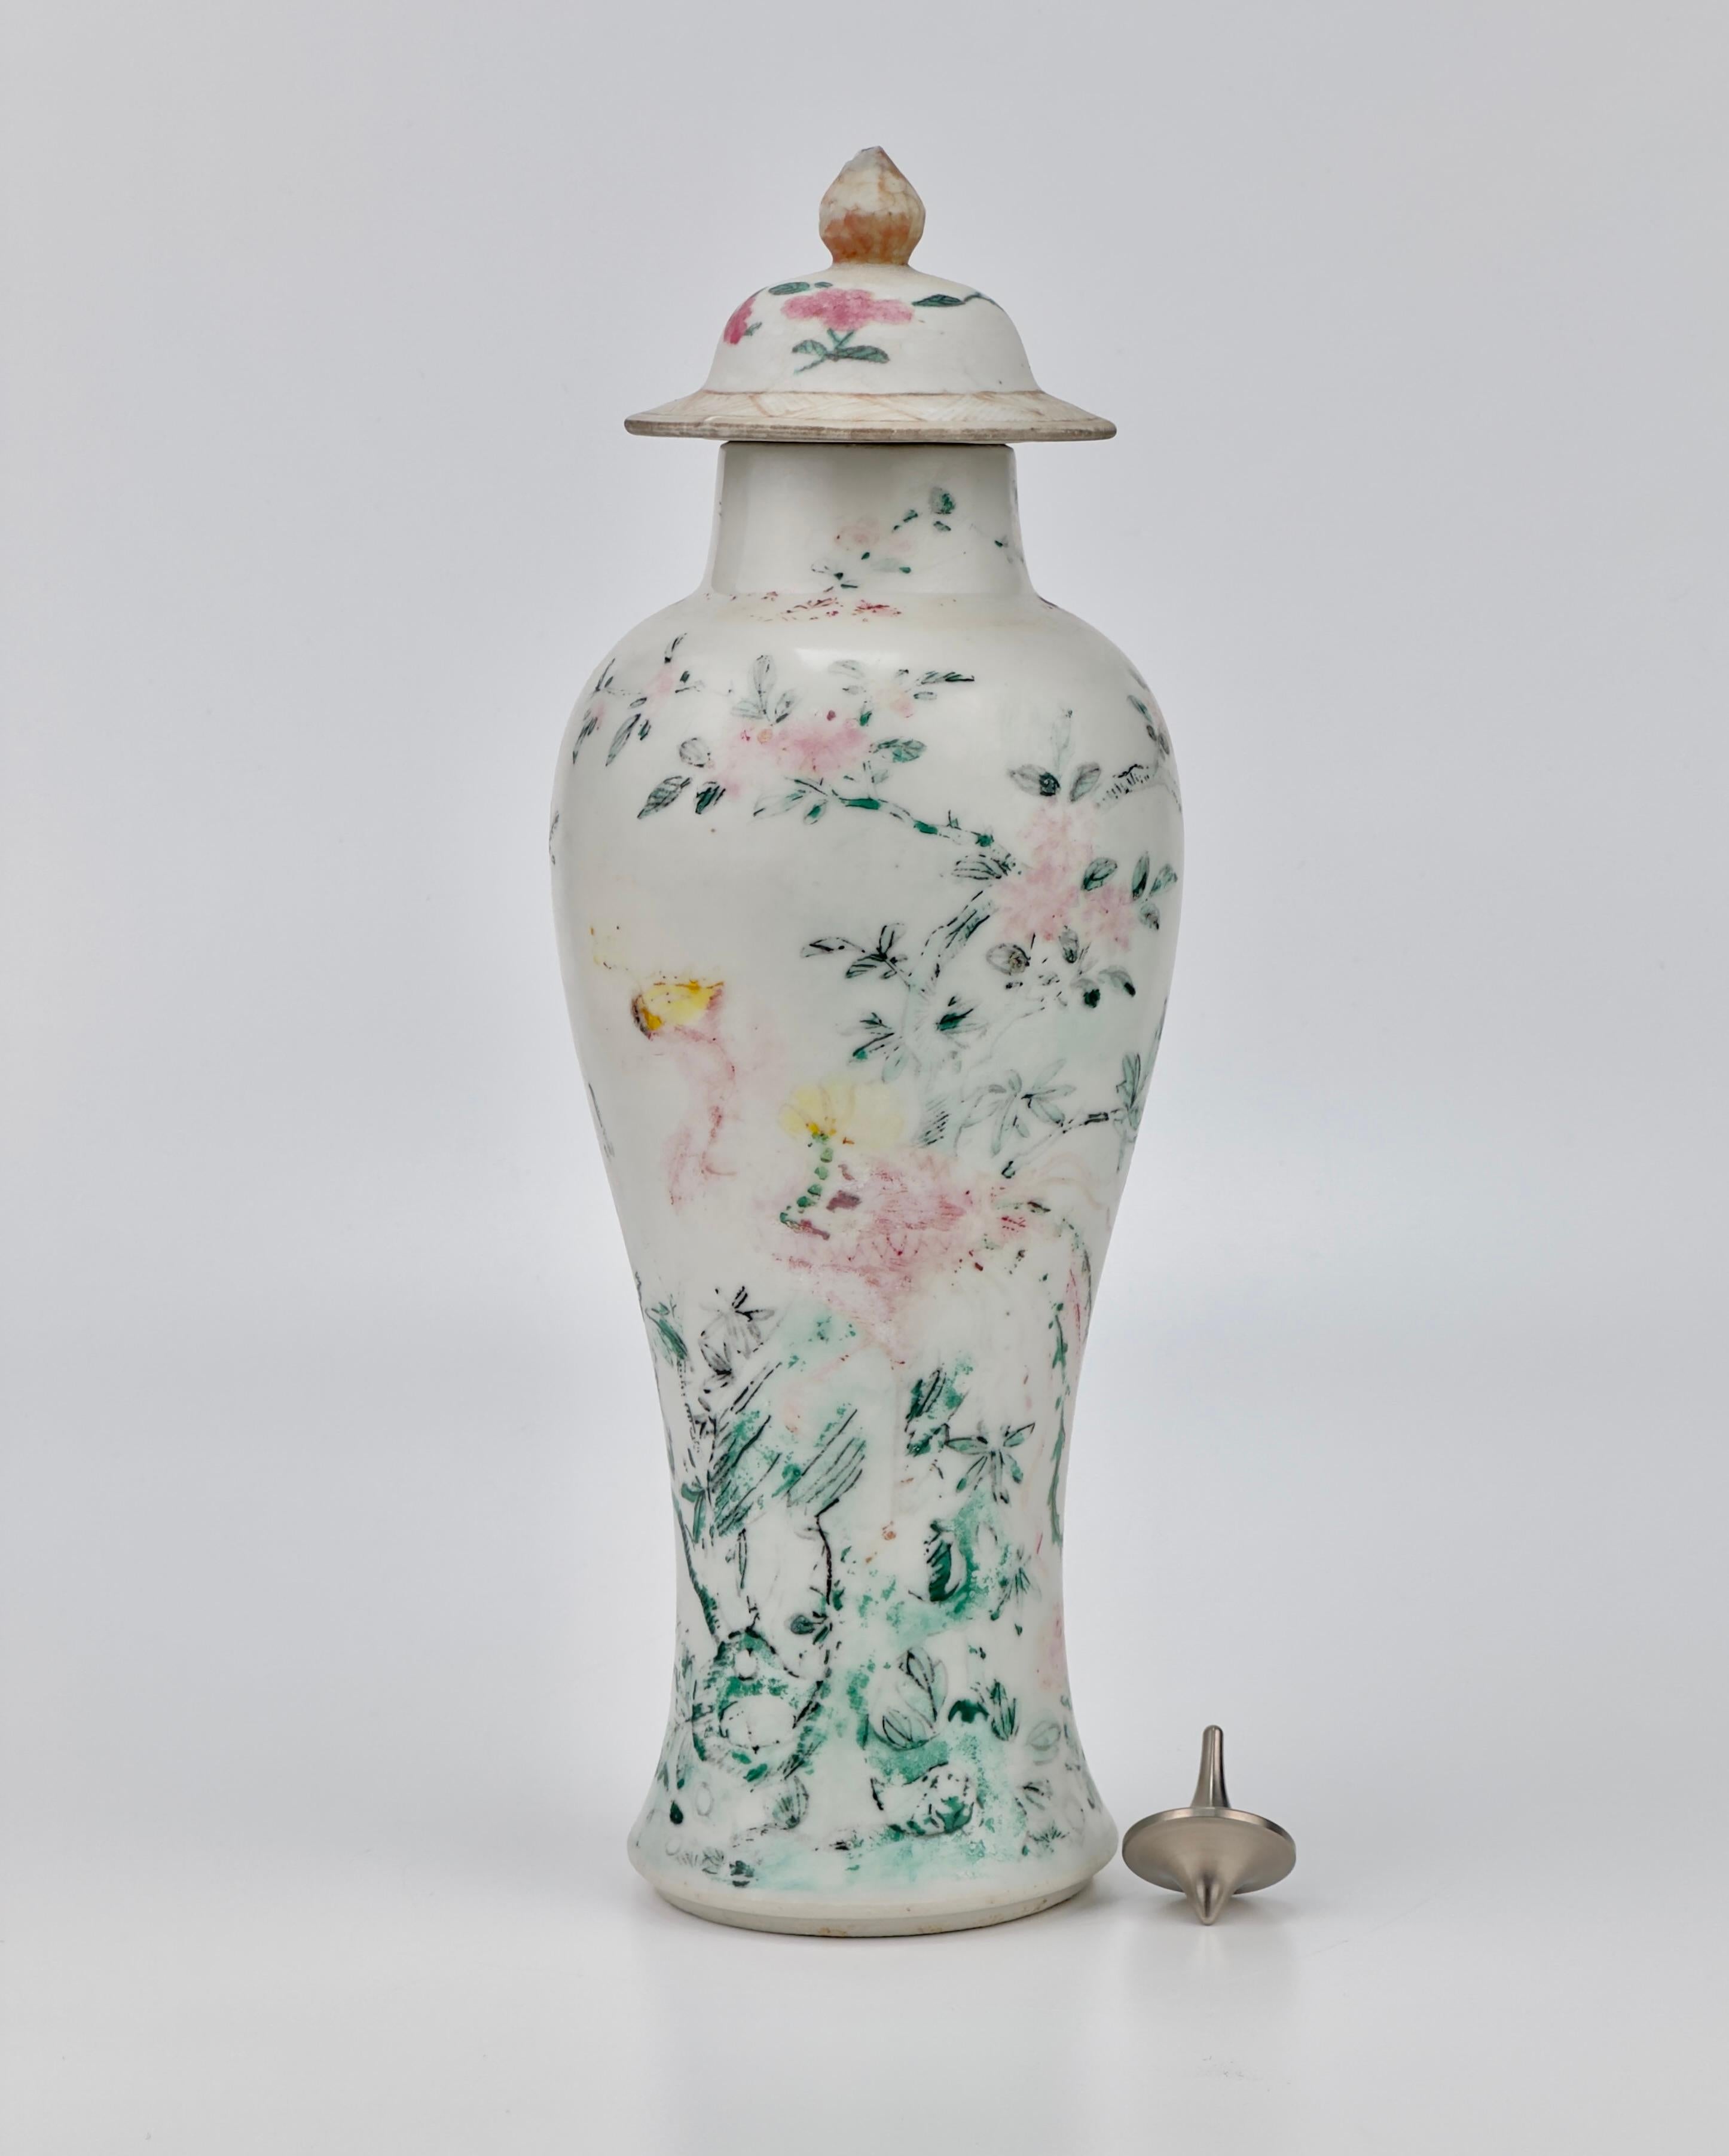 The vase's form is elegant, with a tapered body and domed lid with long line of body, crowned with a delicate finial, embodying the sophistication and high aesthetic standards of Qing porcelain.

This piece is from the early Qing dynasty, and it is